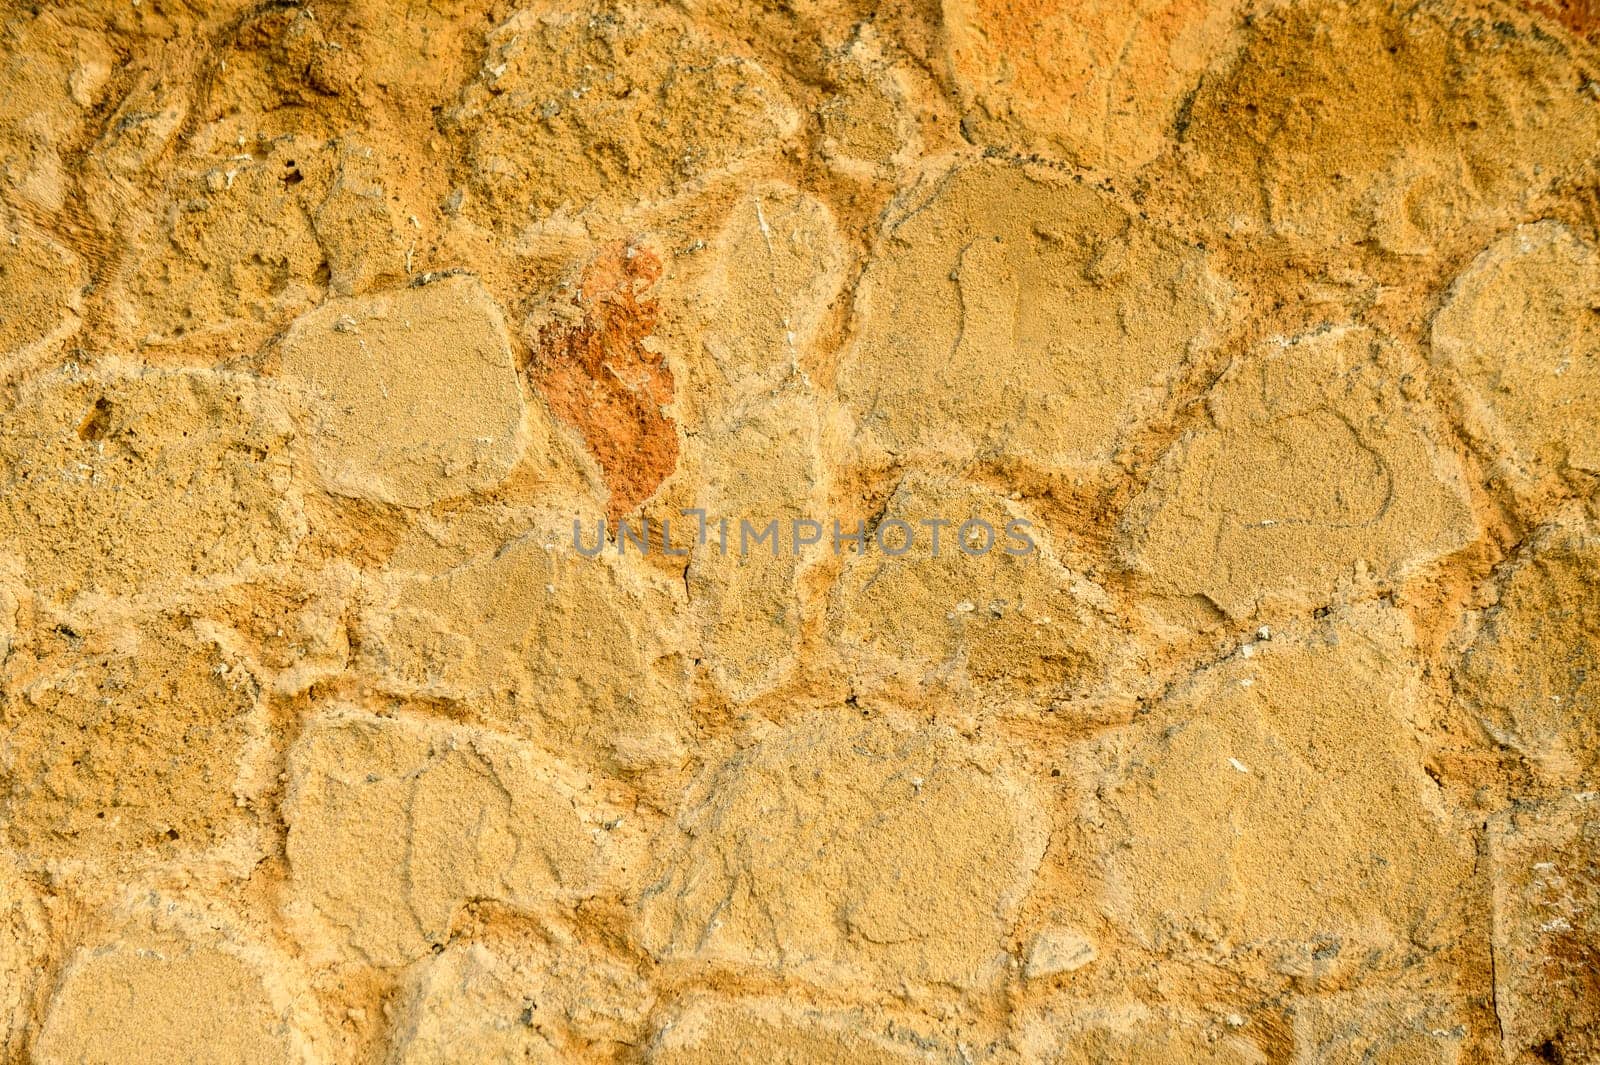 House wall made of natural stones and shell rock as background by Mixa74